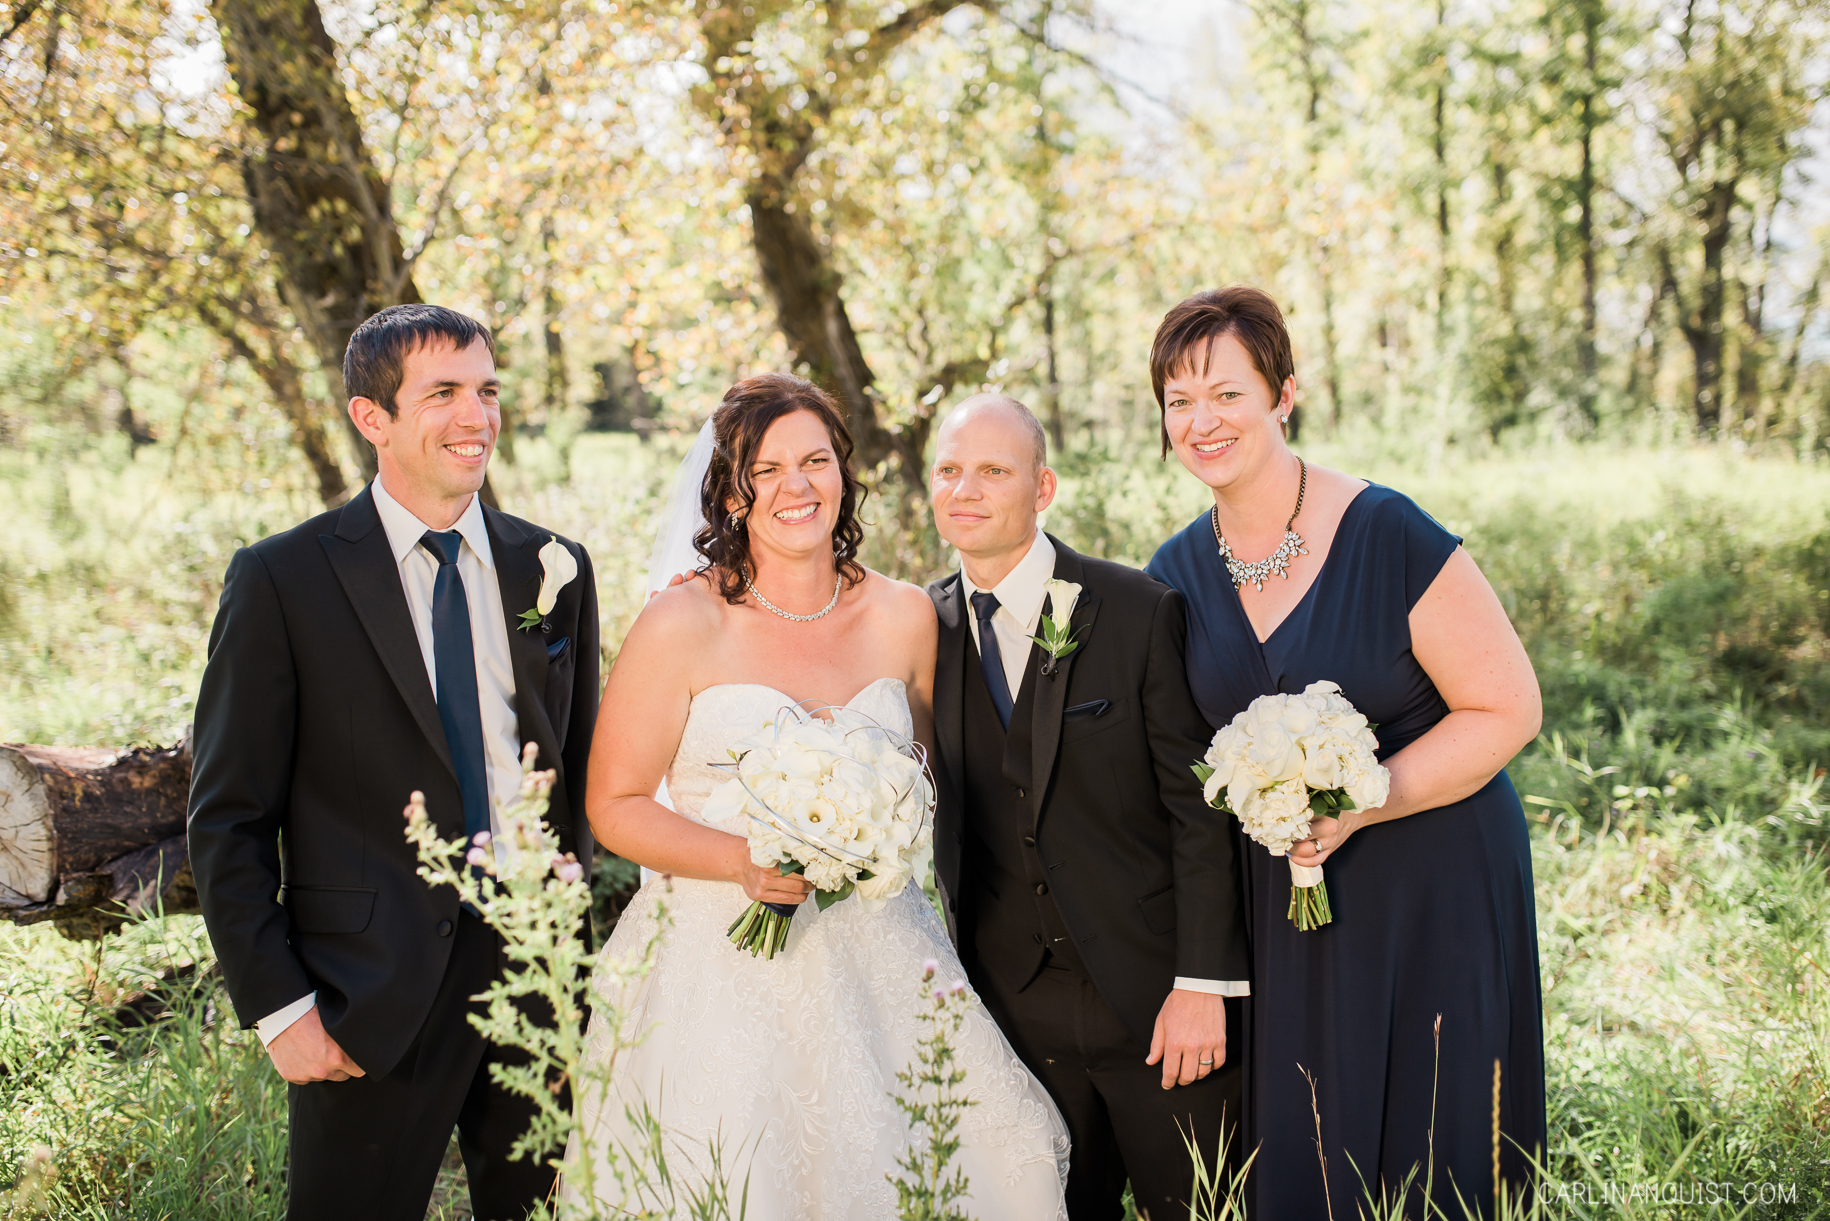 Small Bridal Party | Heritage Pointe Golf Club Wedding Photographer